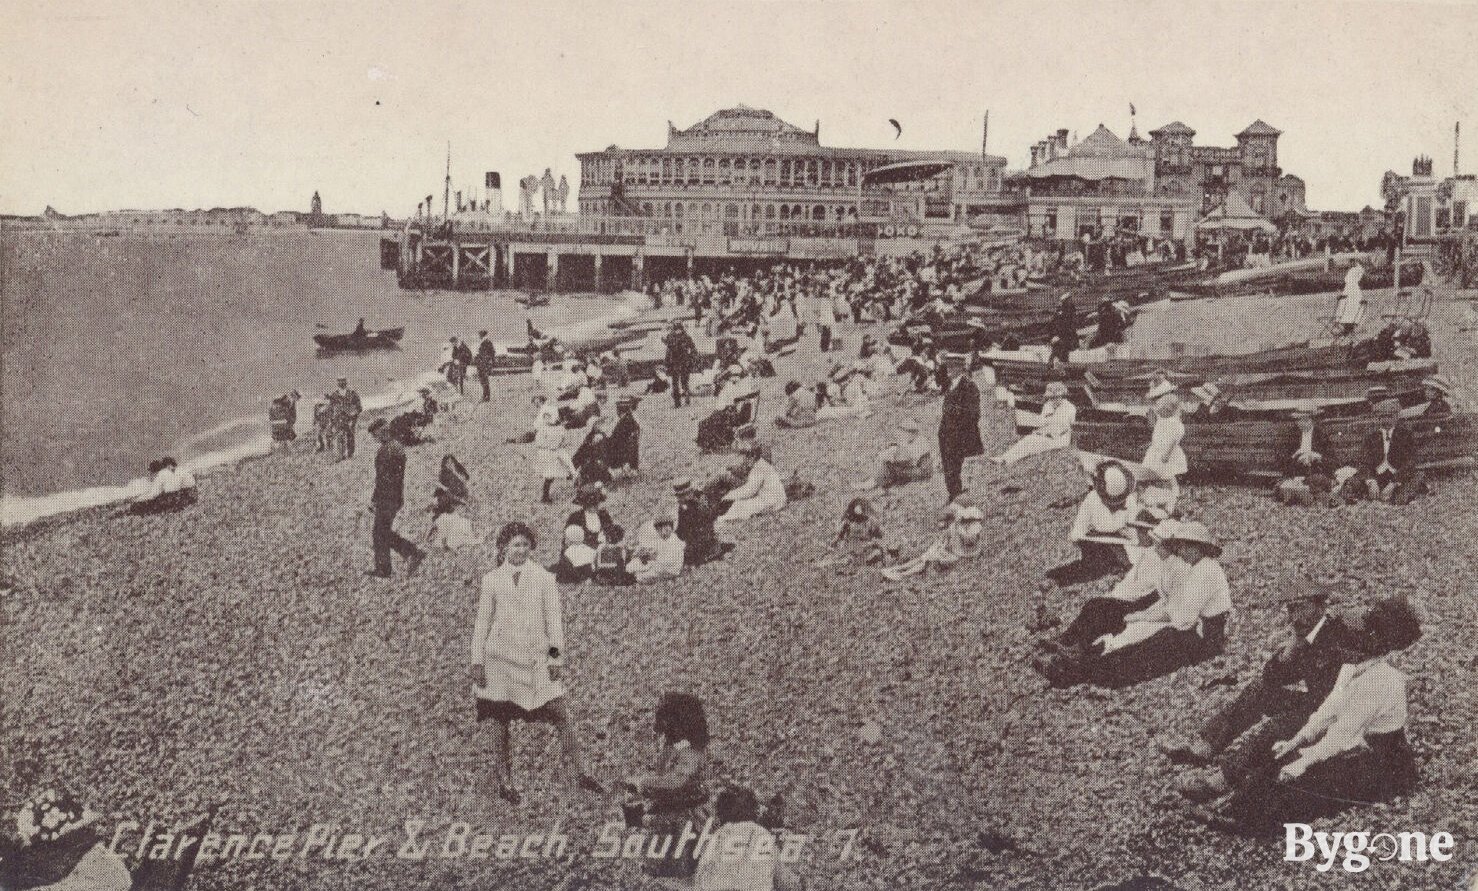 Clarence Pier and Beach, Southsea